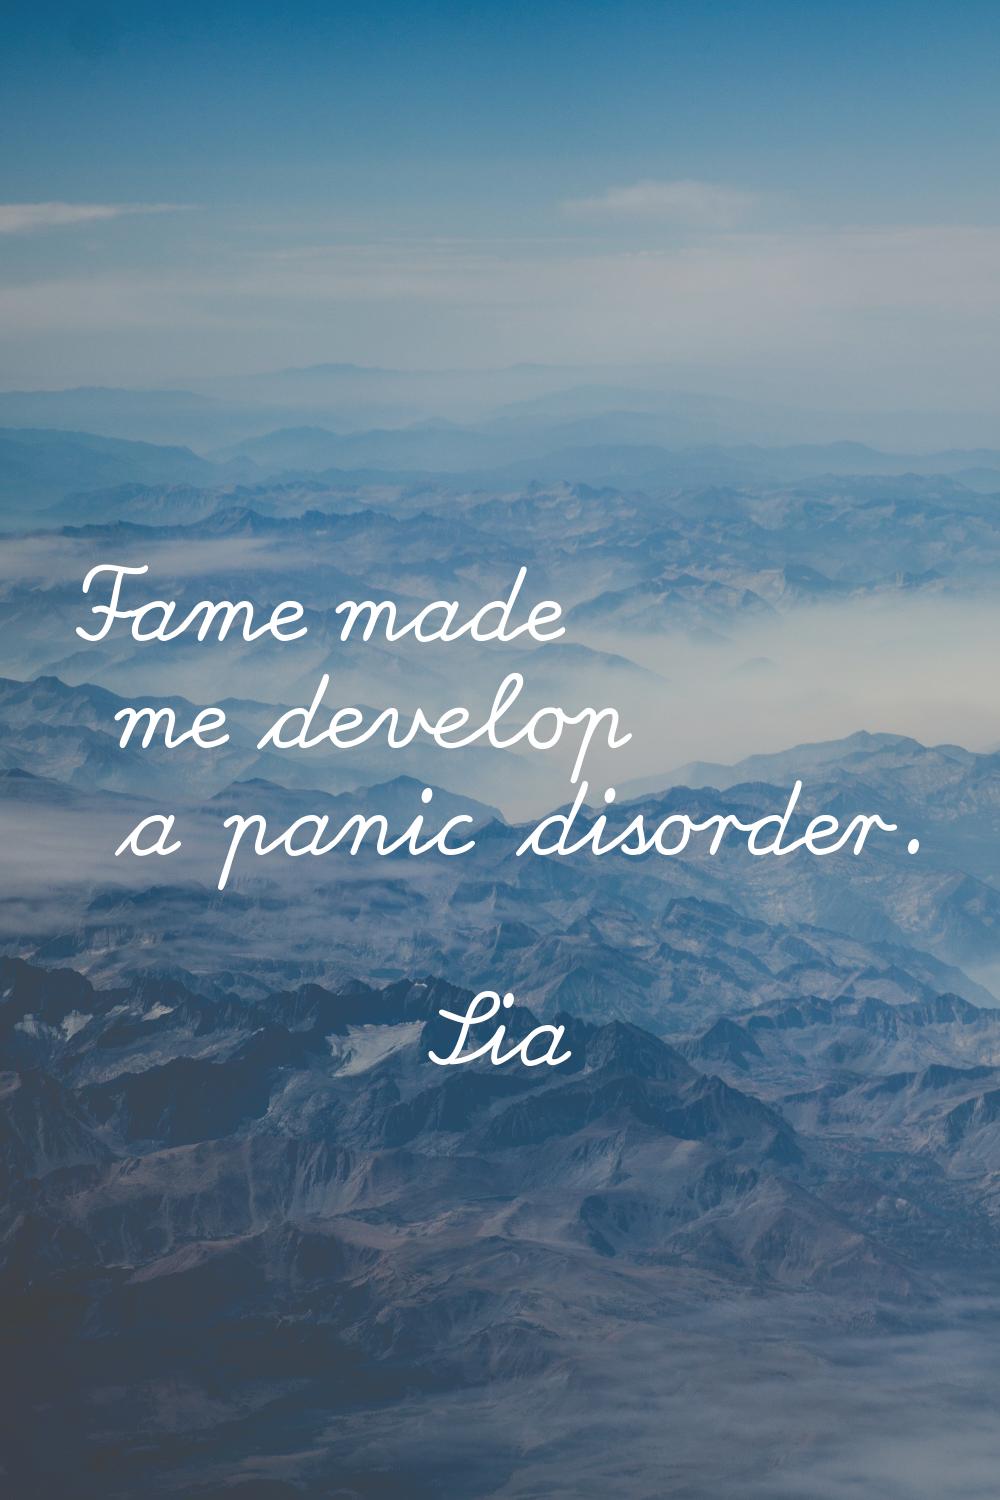 Fame made me develop a panic disorder.